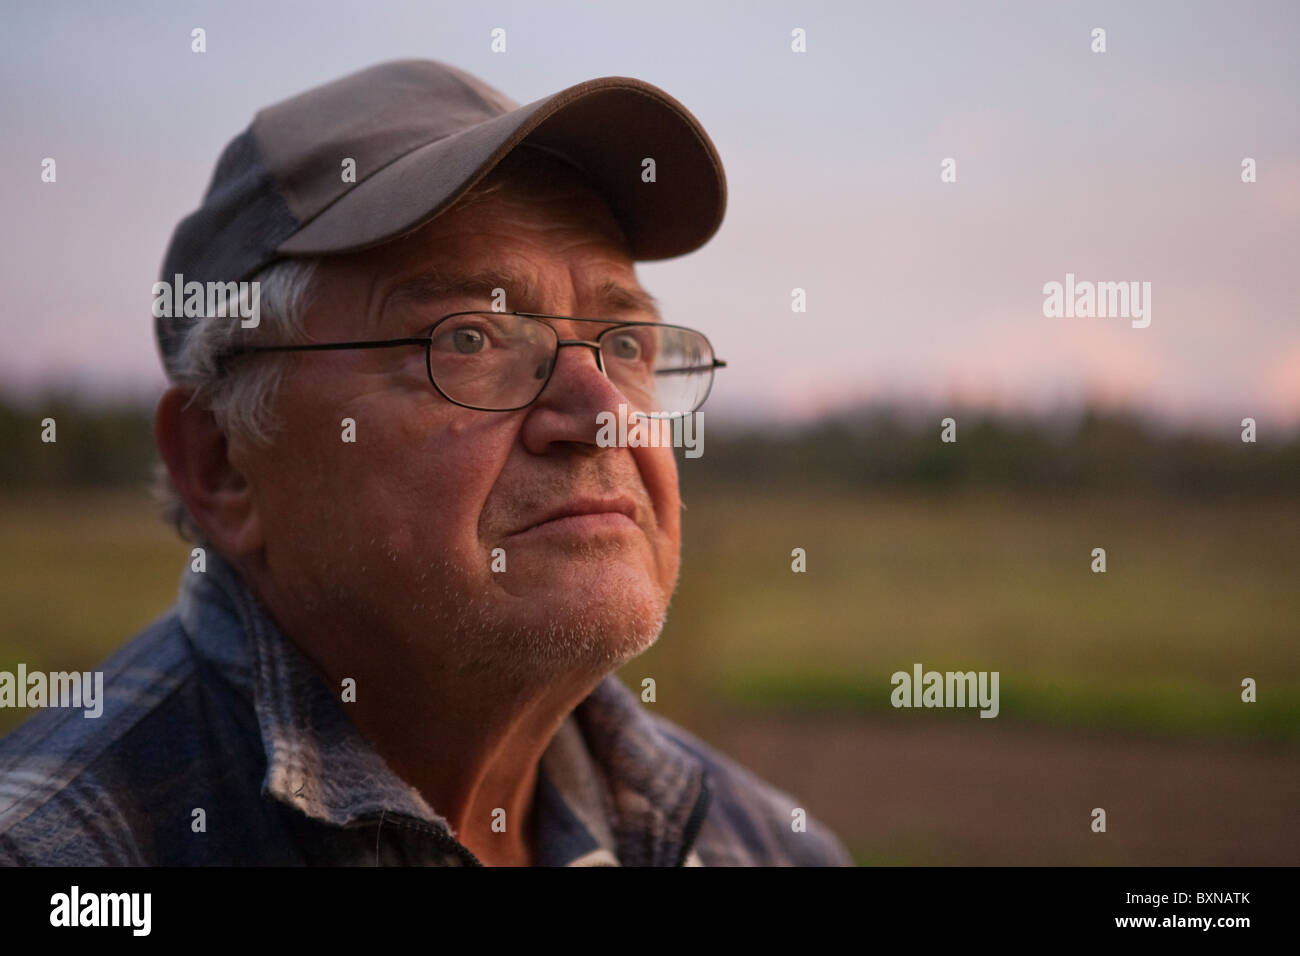 An elderly man with glasses and a cap stares pensively into the sky against the backdrop of the countryside Stock Photo